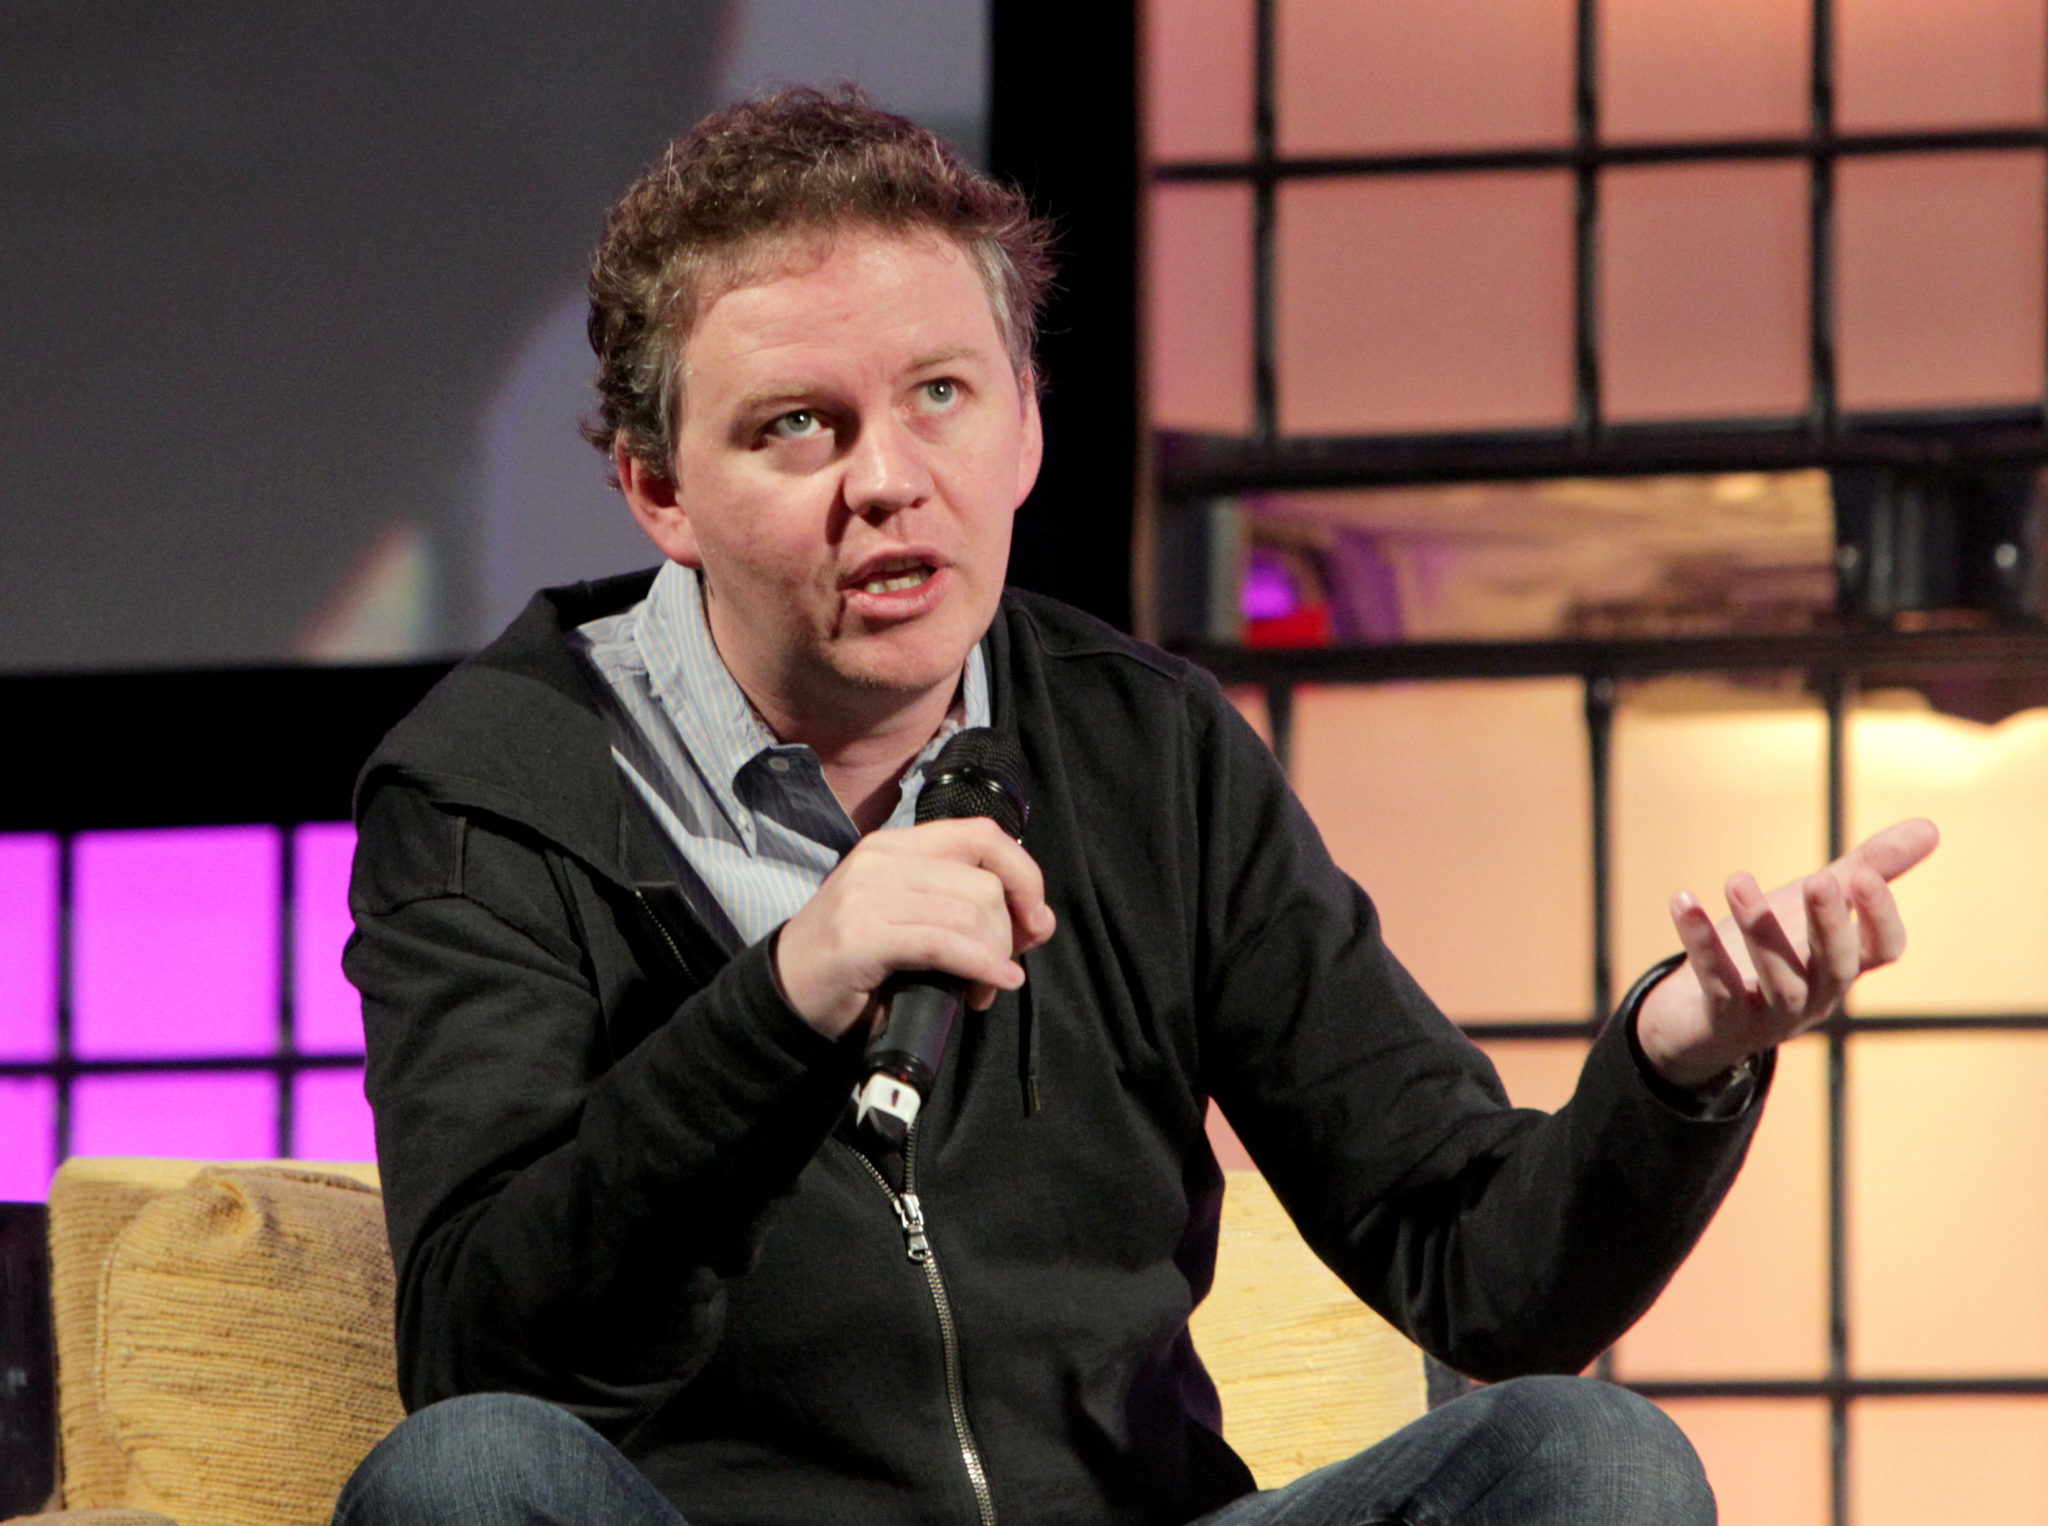 Cloudflare co-founder Matthew Prince